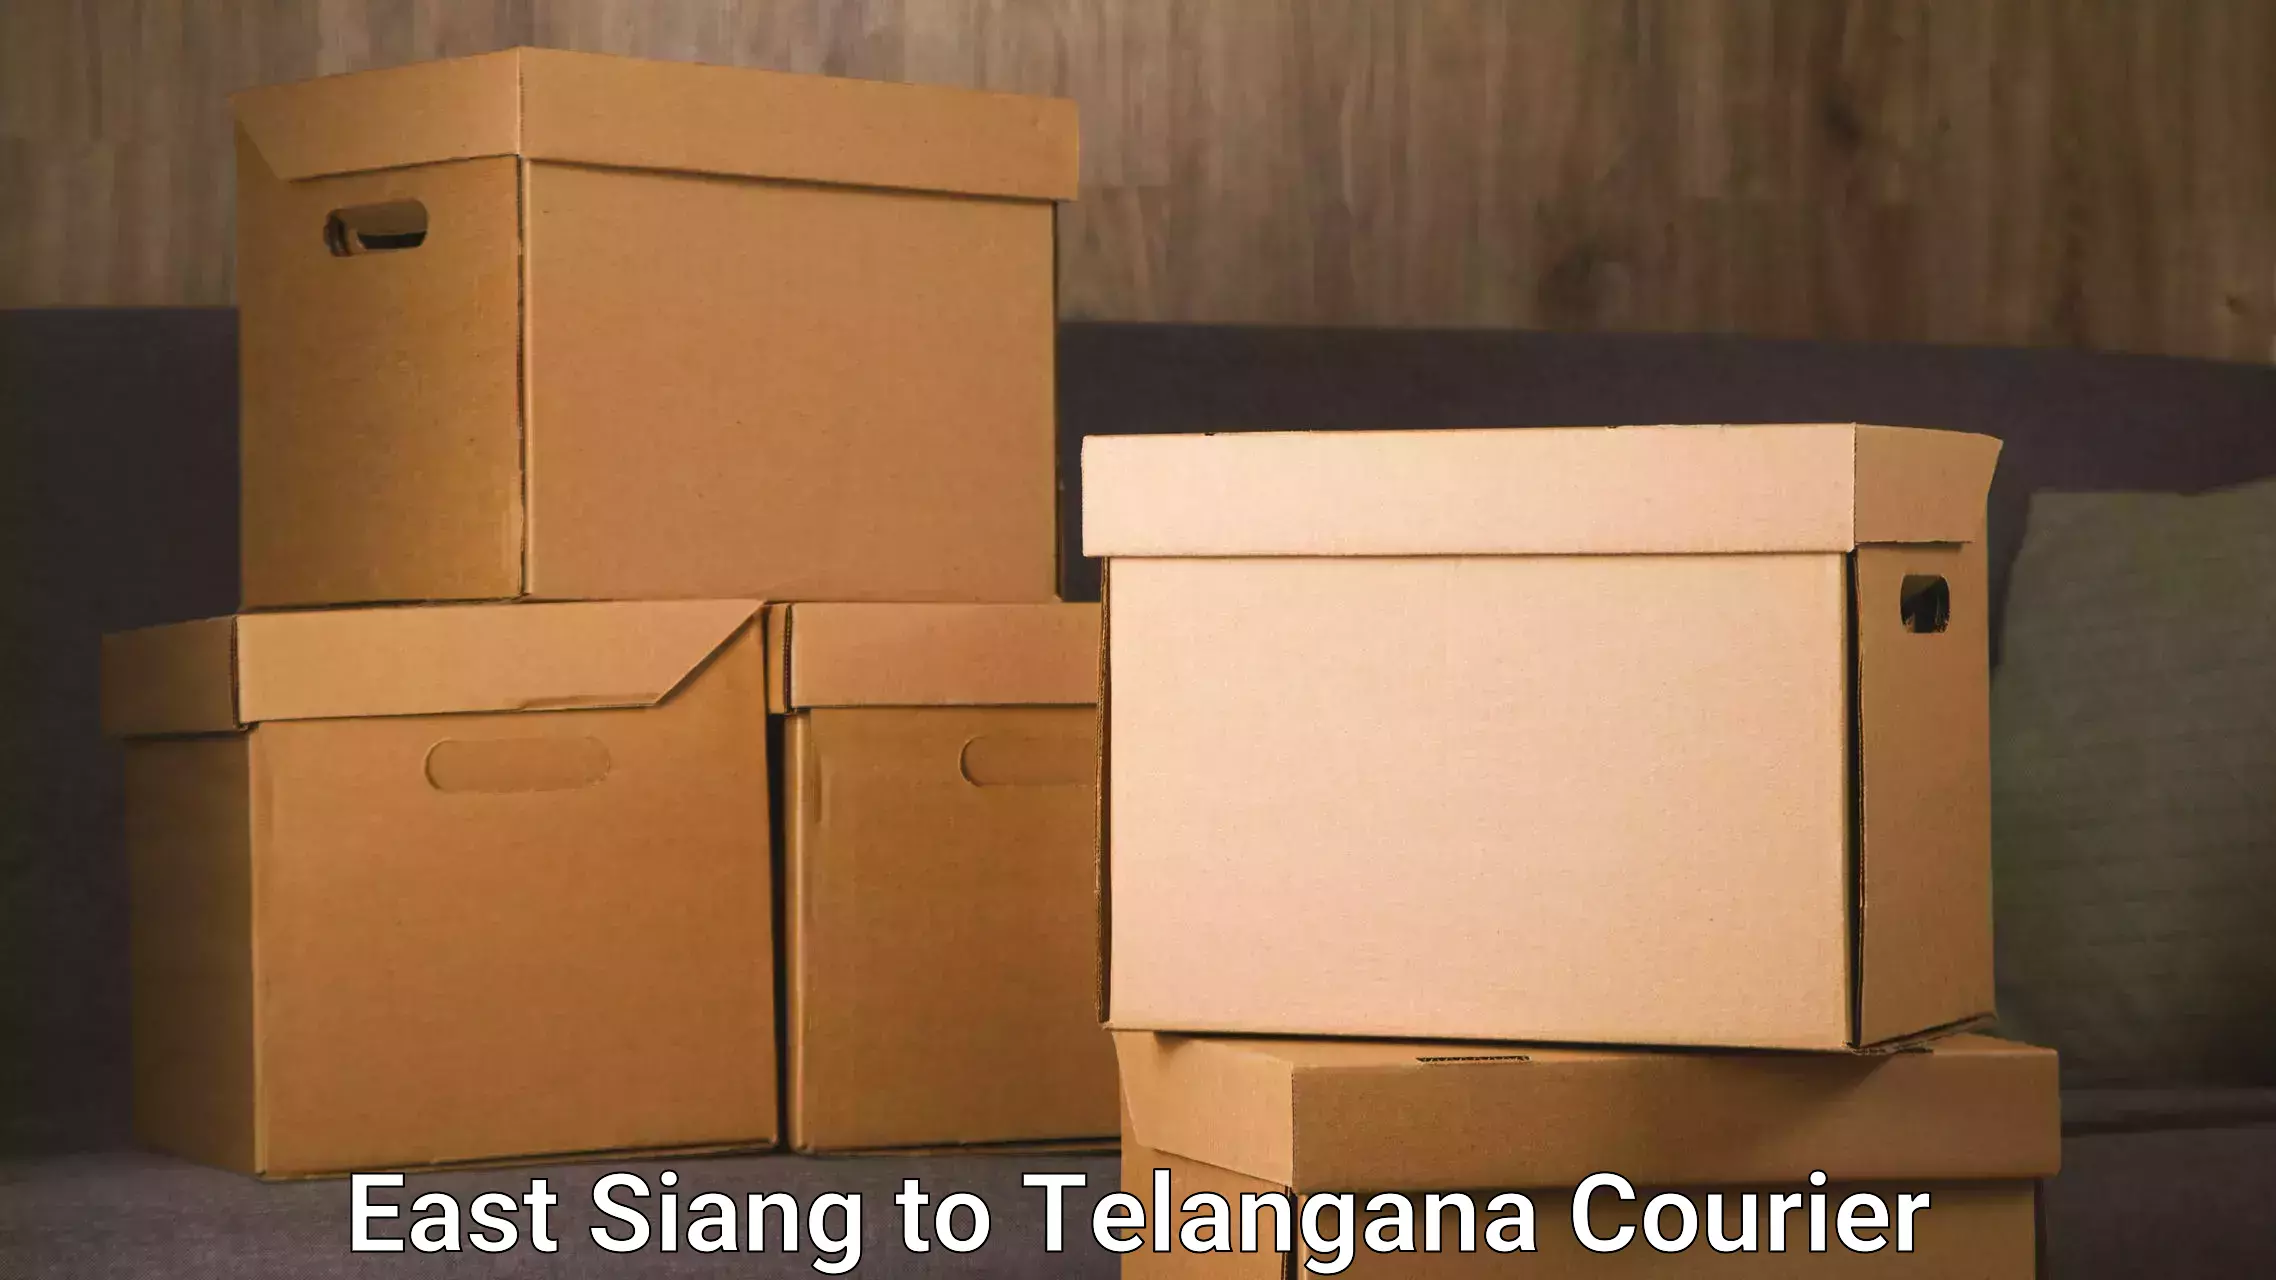 Subscription-based courier East Siang to Nereducharla